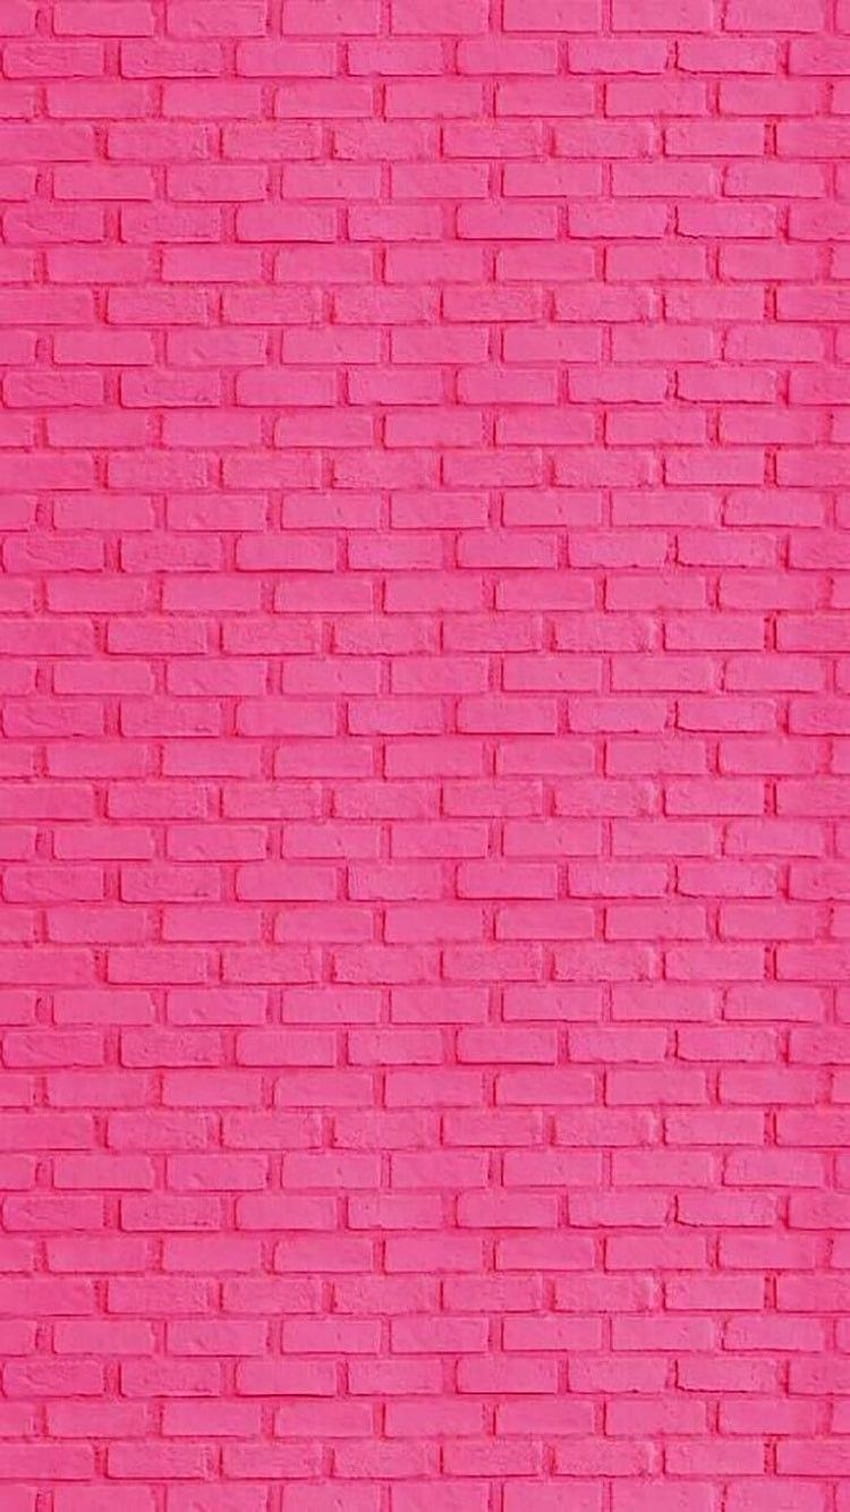 Jaqueline Mendez on everything in 2019, Pink Brick HD phone wallpaper